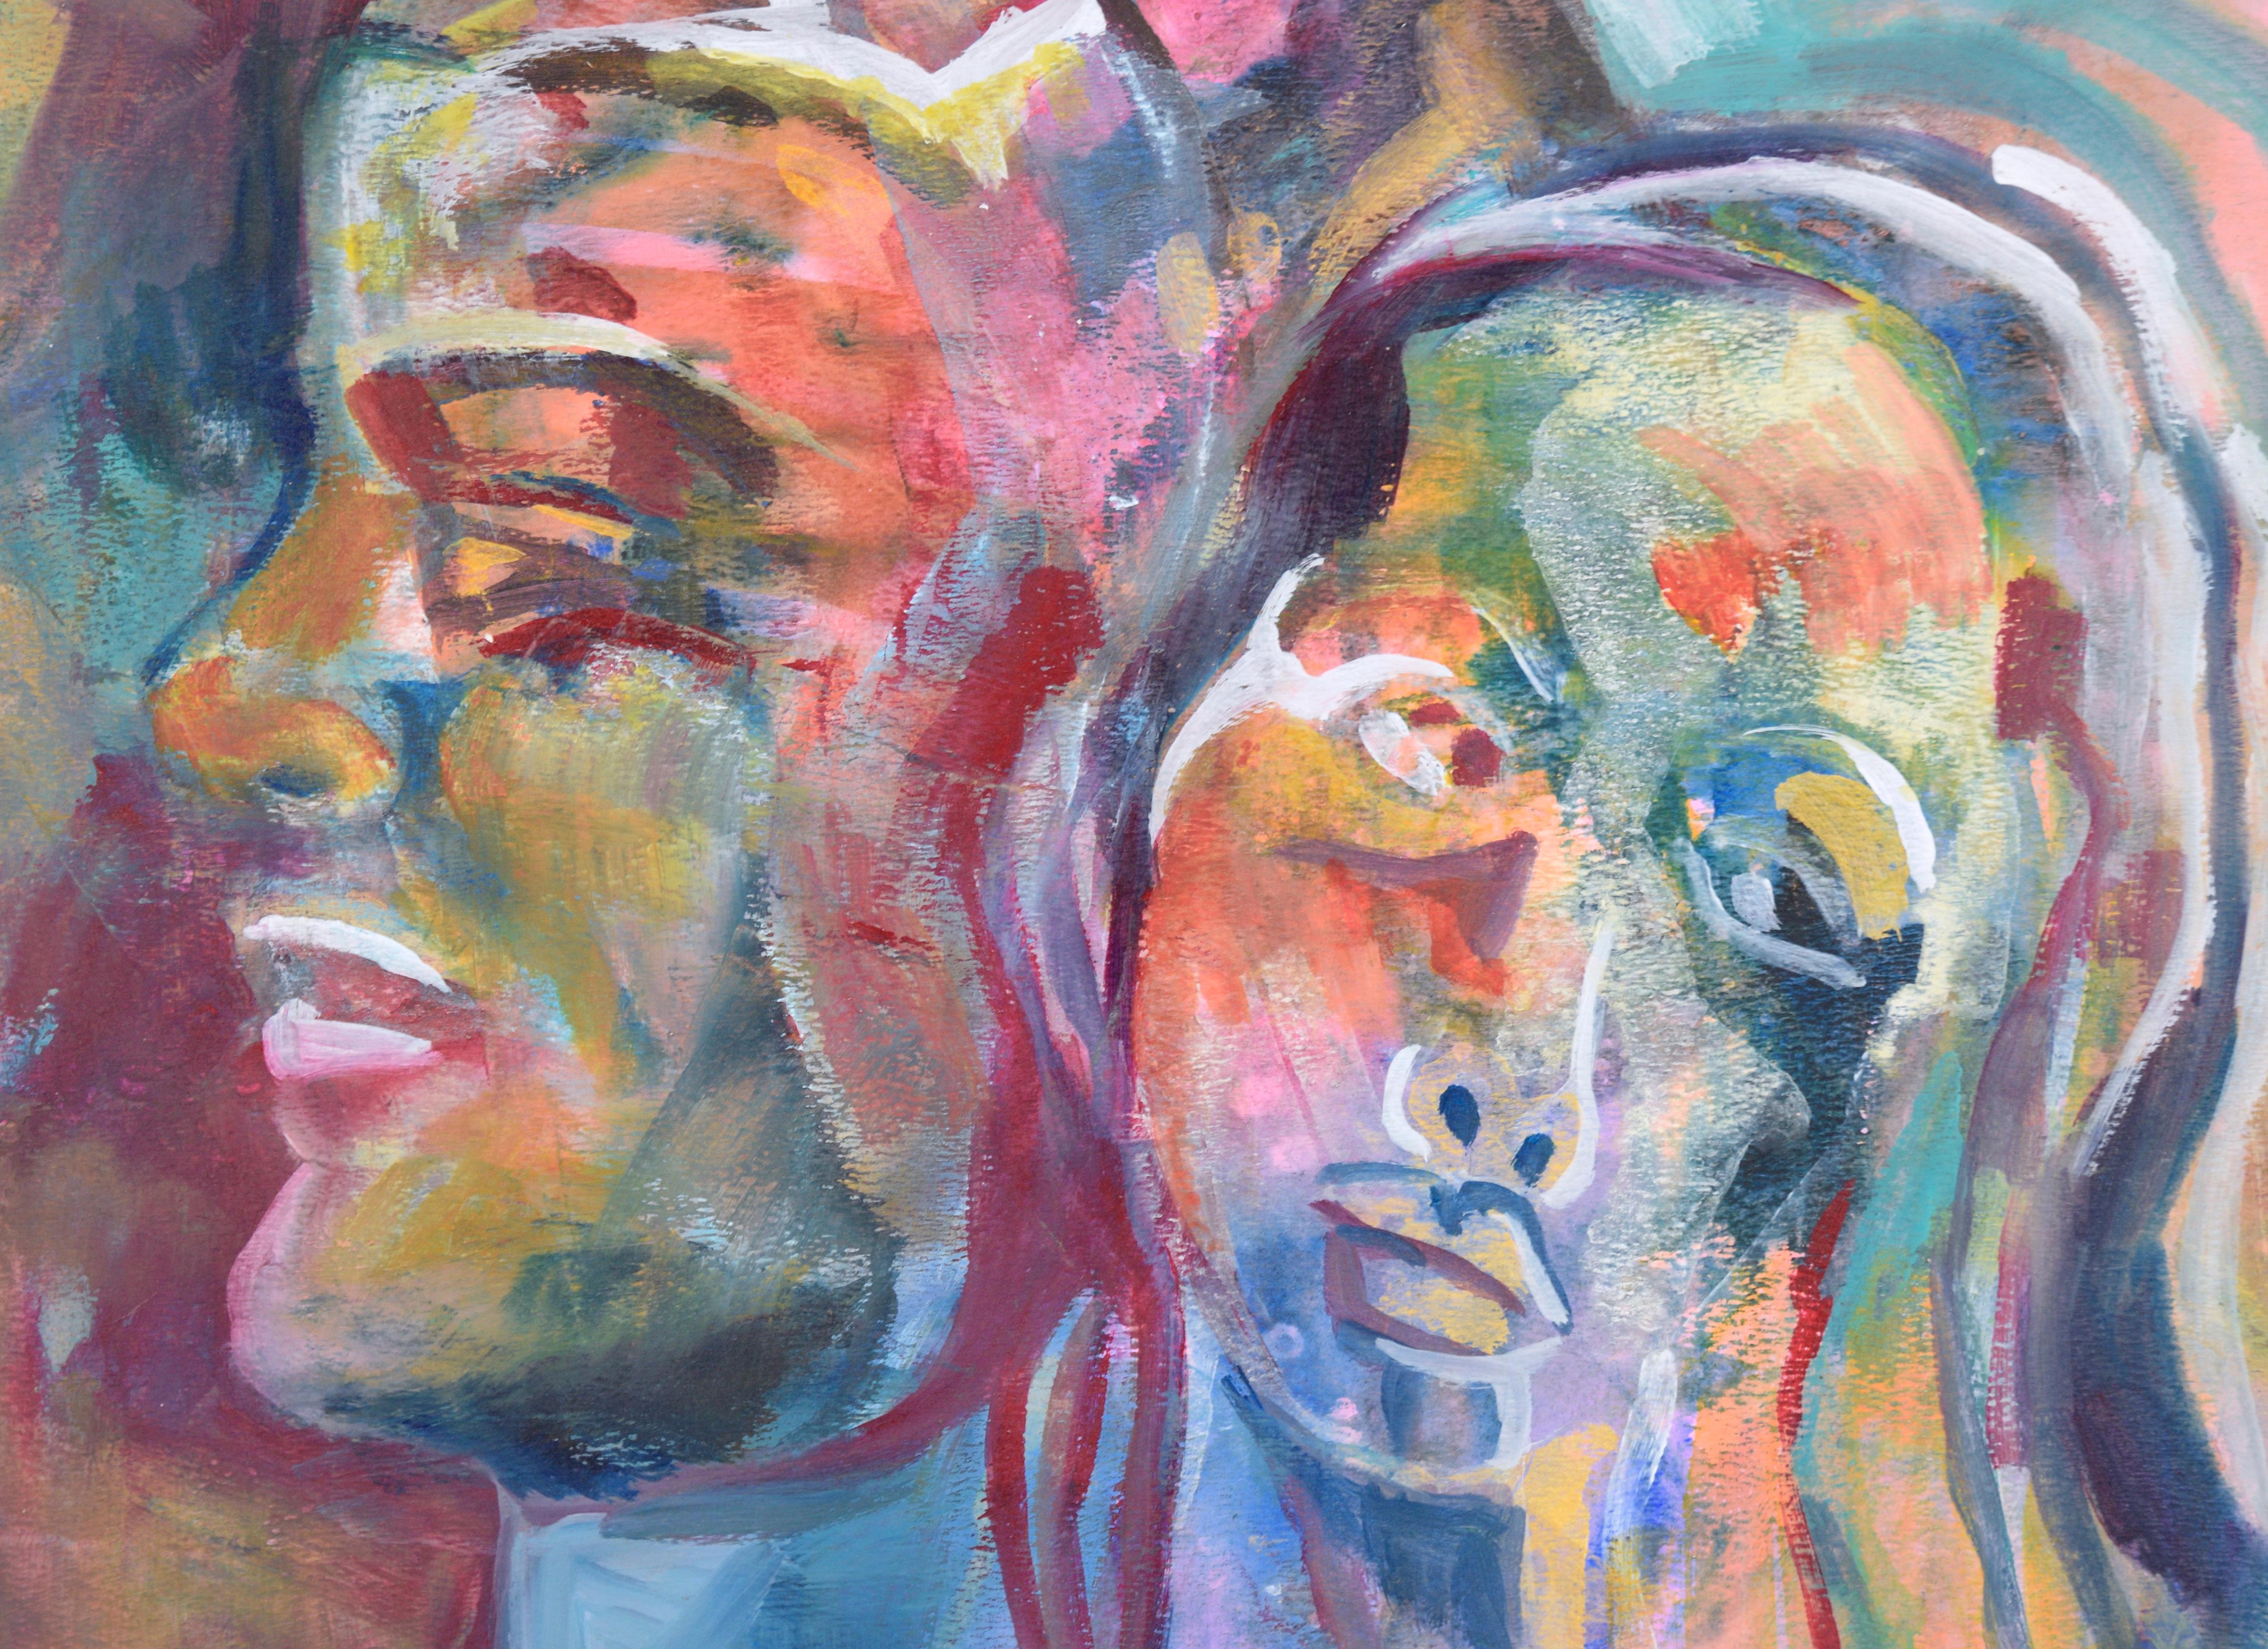 Vibrant double protrait by California artist Virginia J. Hughins (American, 1923-2004). There are two portraits in this compostion, partially overlapping each other. They are executed in bright pinks, oranges, greens, and blues, with white